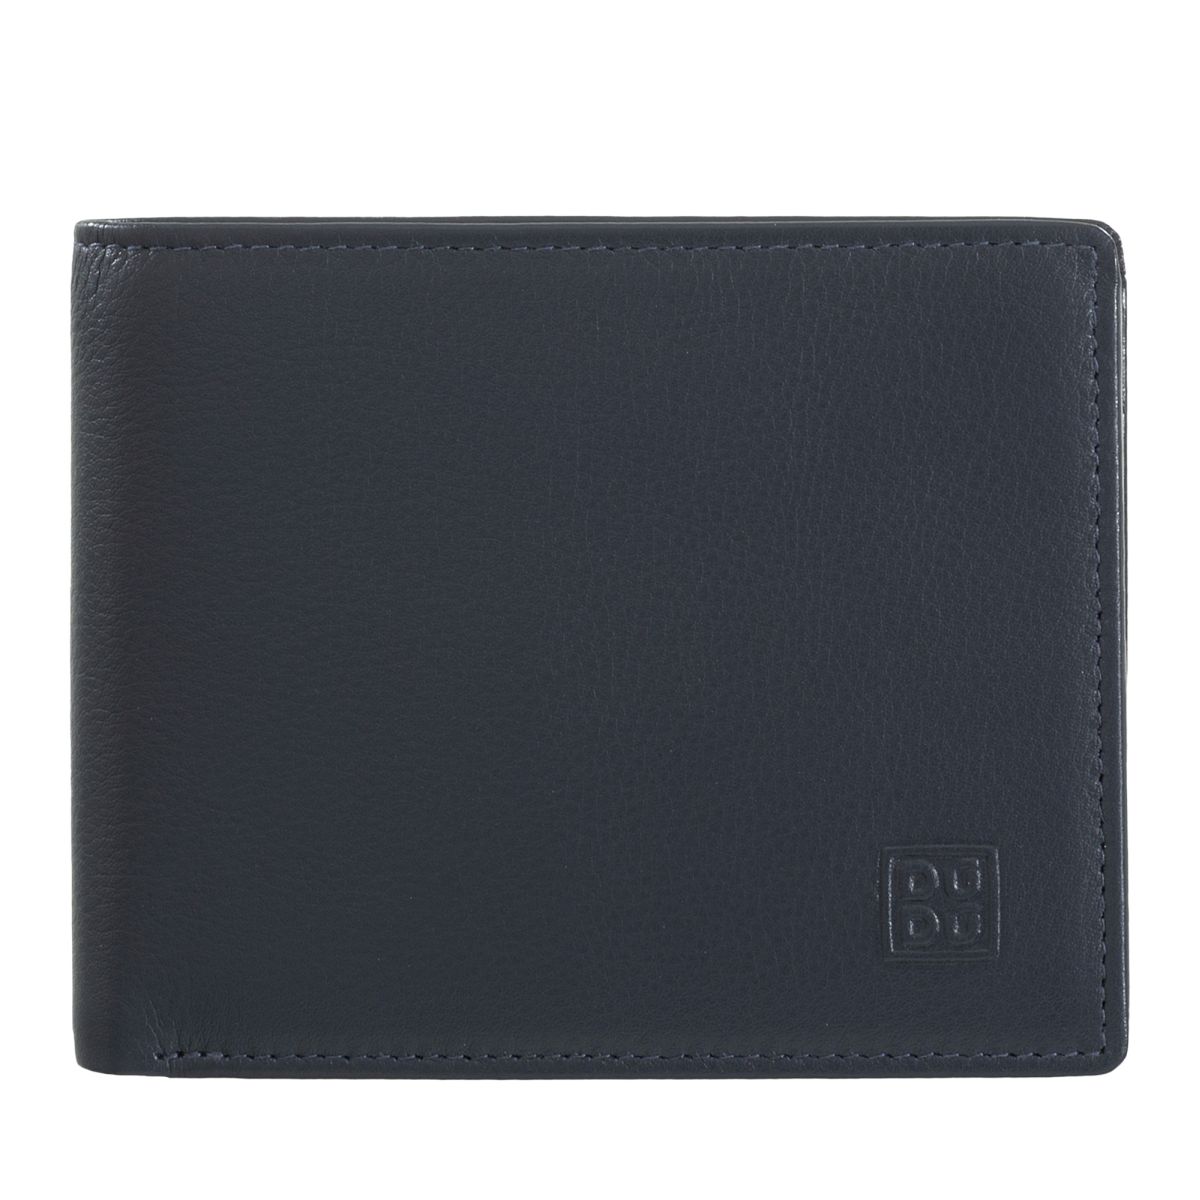 DuDu Leather classic multi color wallet with coin purse and inside flap - Navy